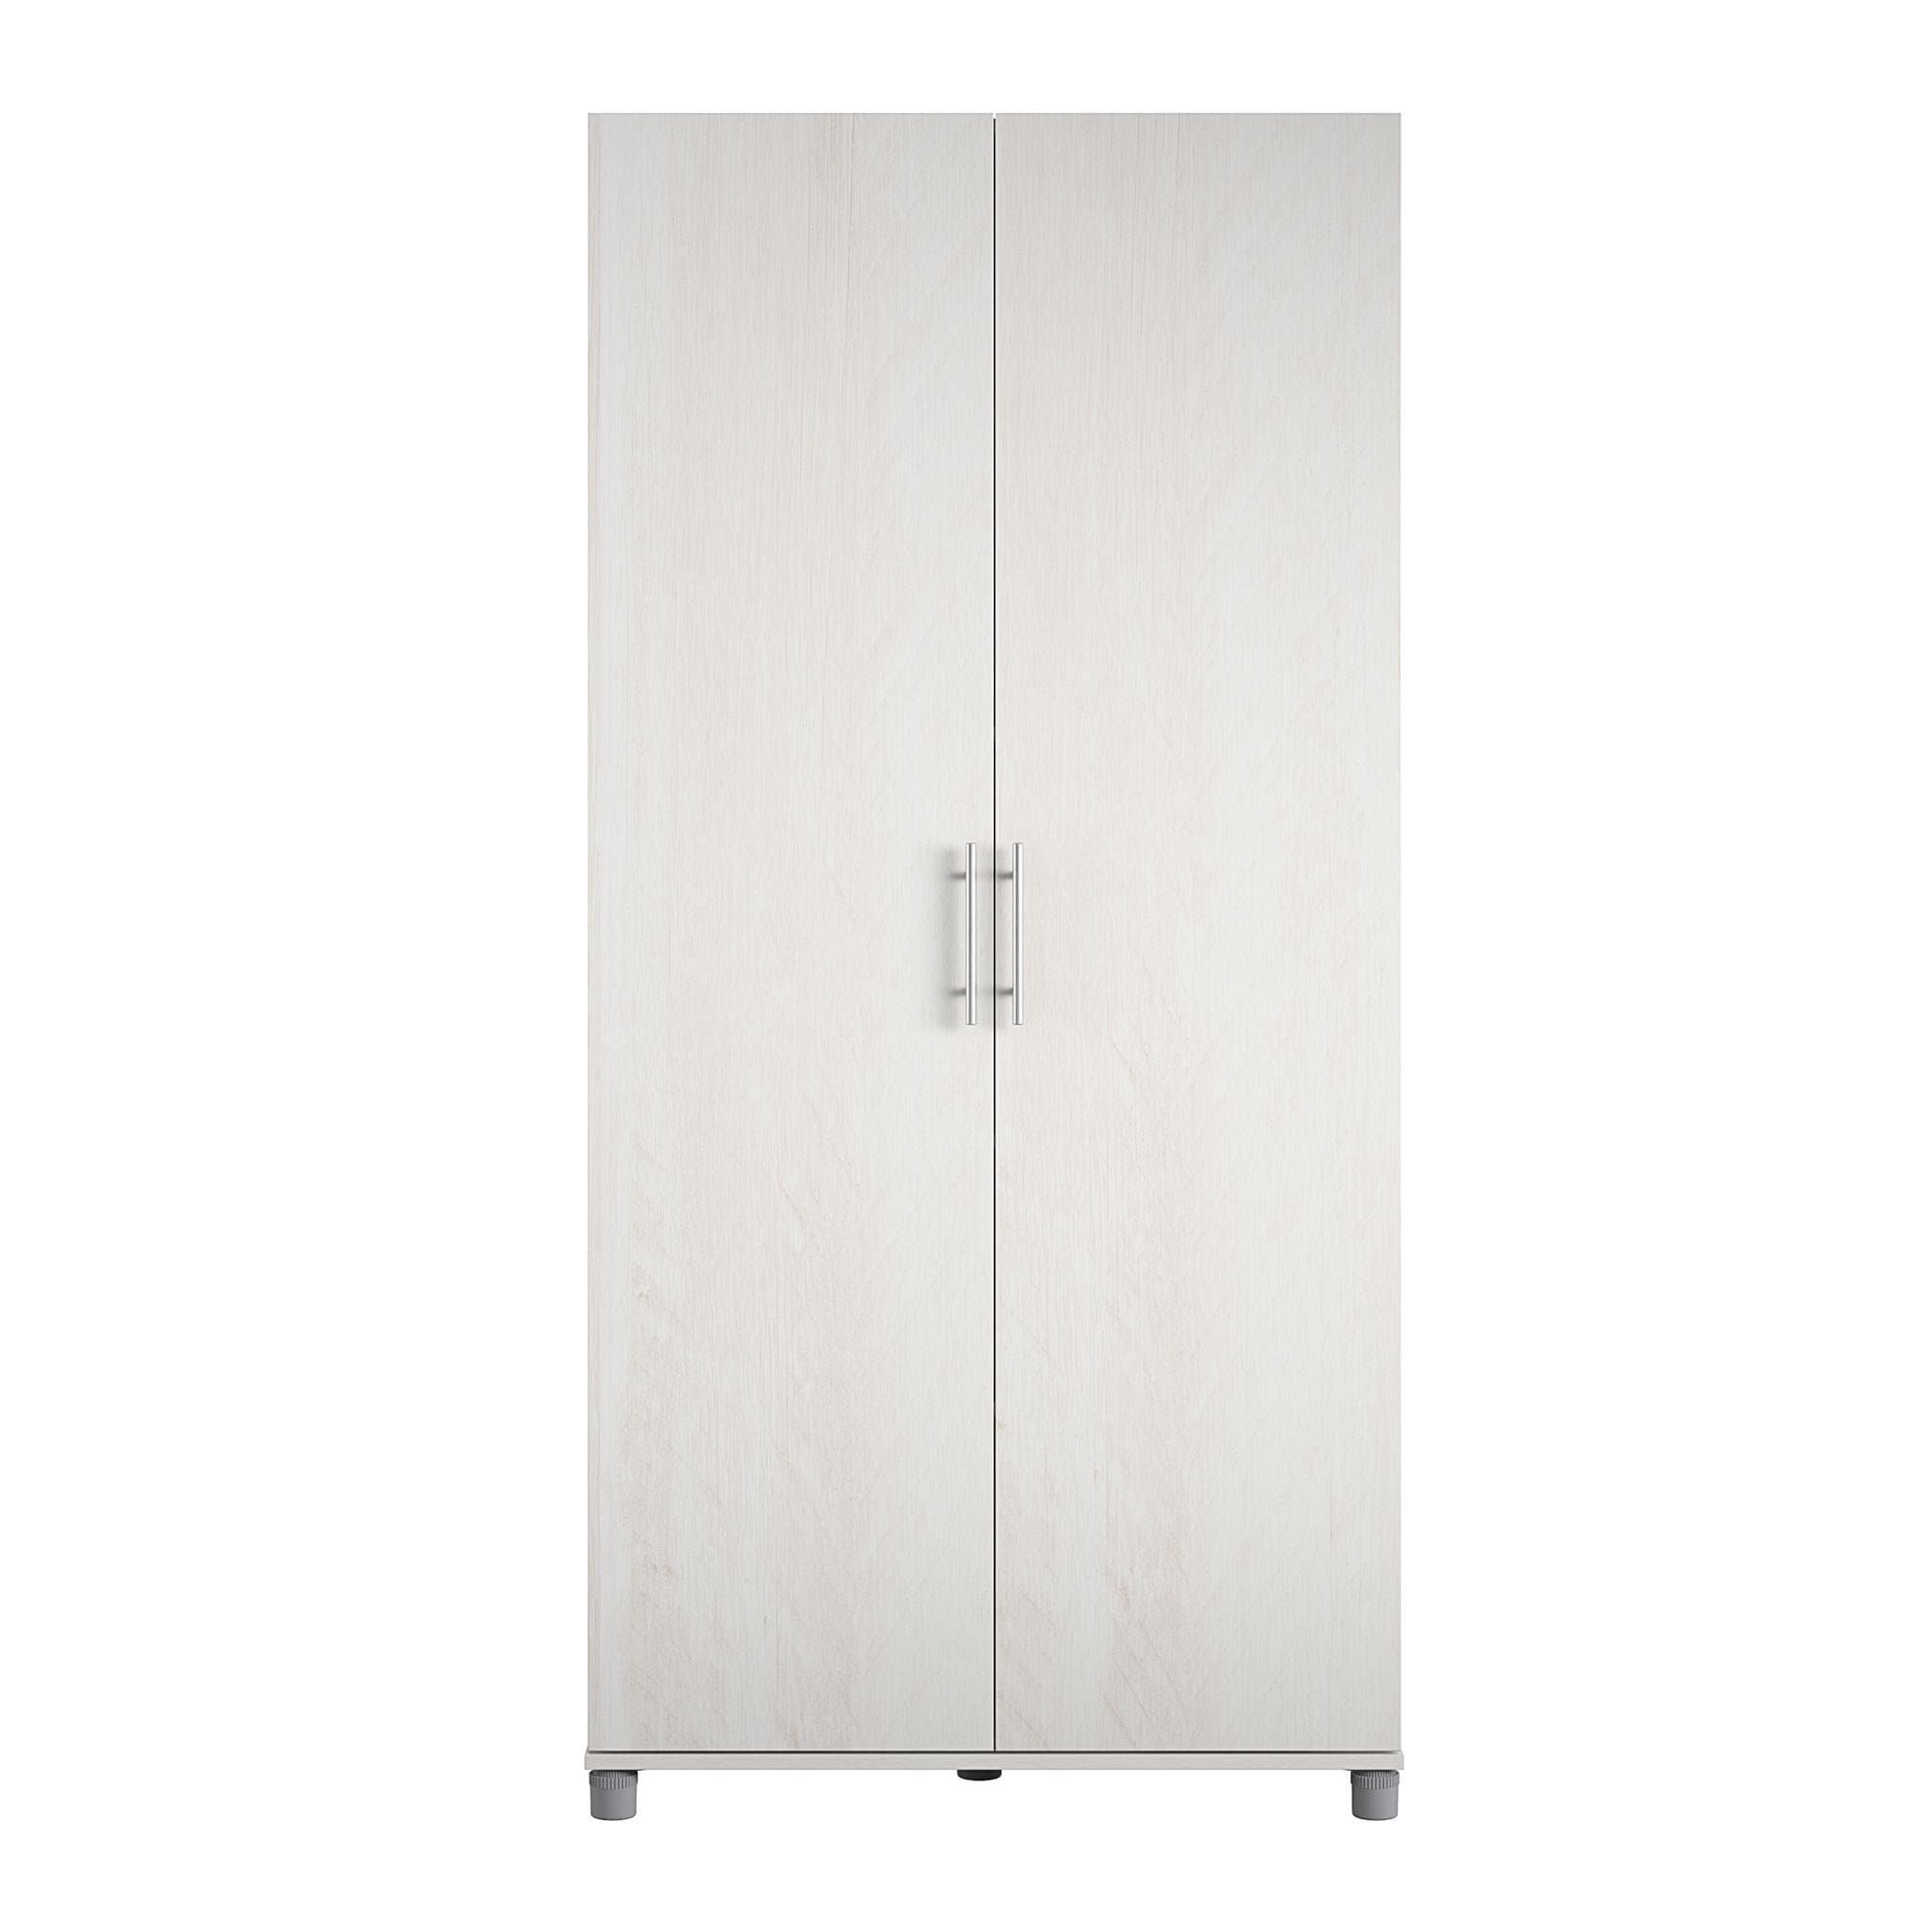 70 inch Freestanding Storage Cabinet with 2 Doors and 5 Shelves-White